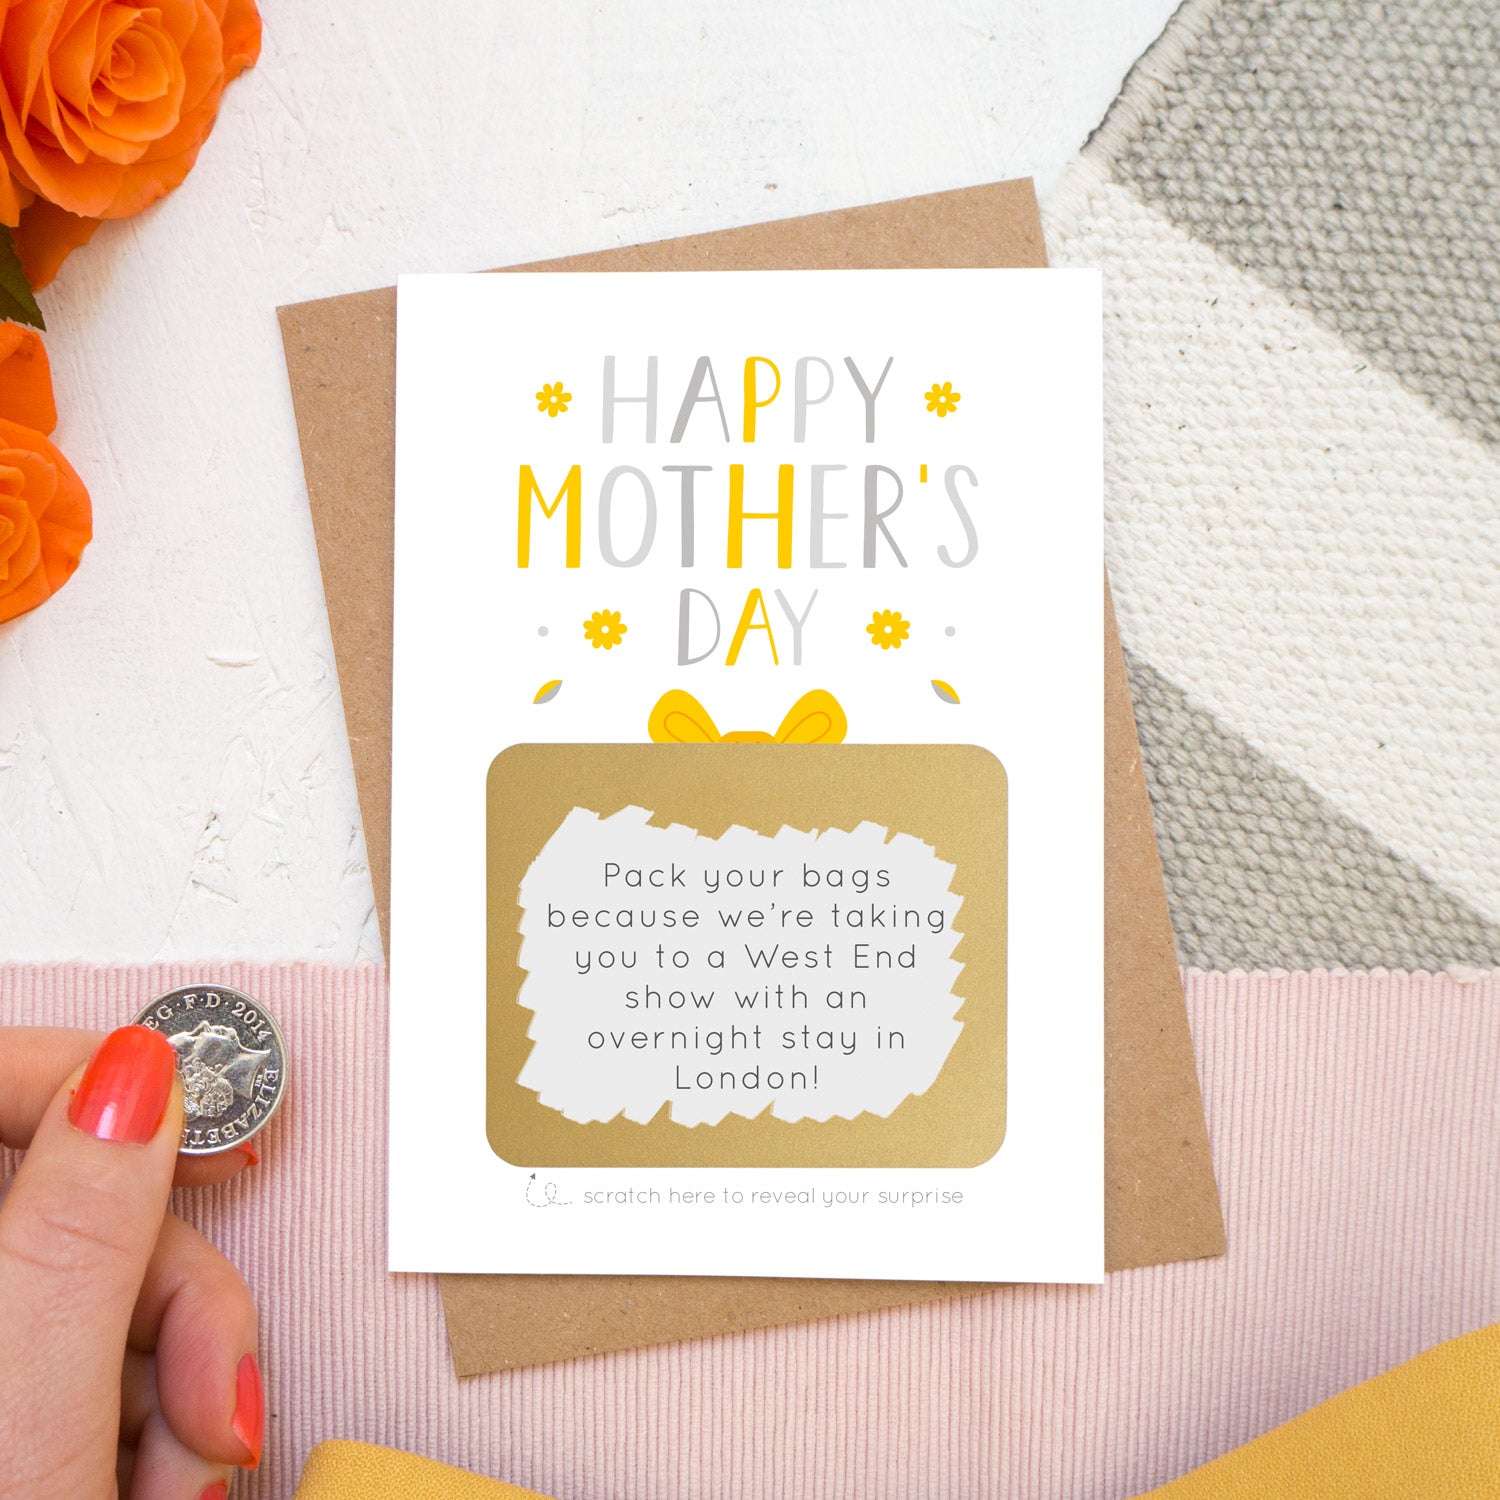 A mother’s day present scratch card lying on a kraft brown envelope on top of a white, grey and pink background with orange roses poking in the top left. The card reads ‘Happy Mother’s day’ and the gold present has been scratched off  with a coin to reveal a custom message to a mum. This card is in the yellow and grey colour palette.